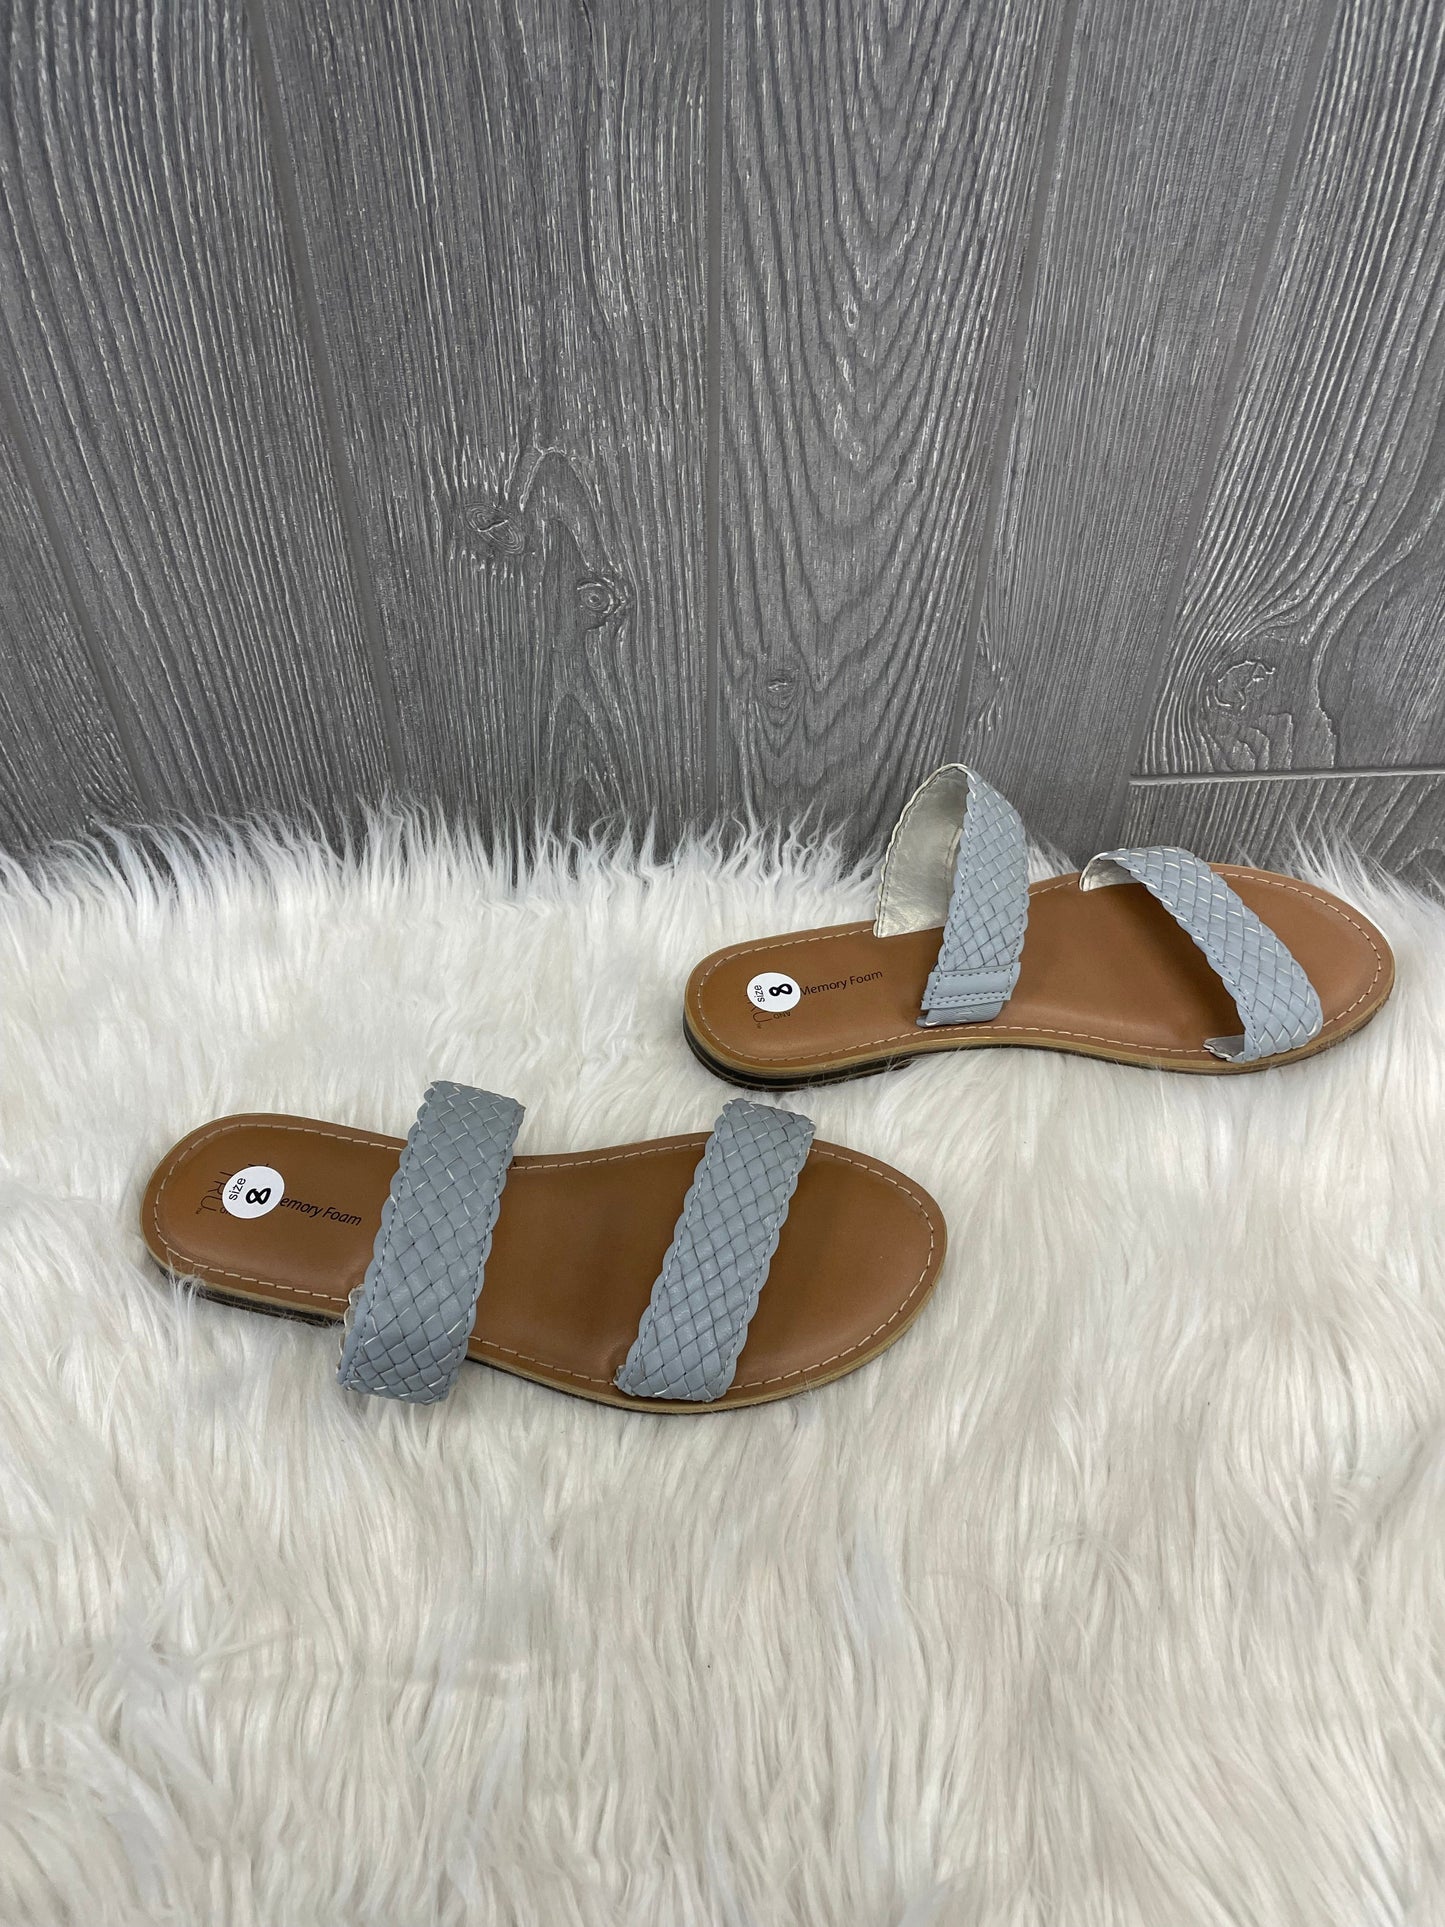 Grey Sandals Flats Time And Tru, Size 8